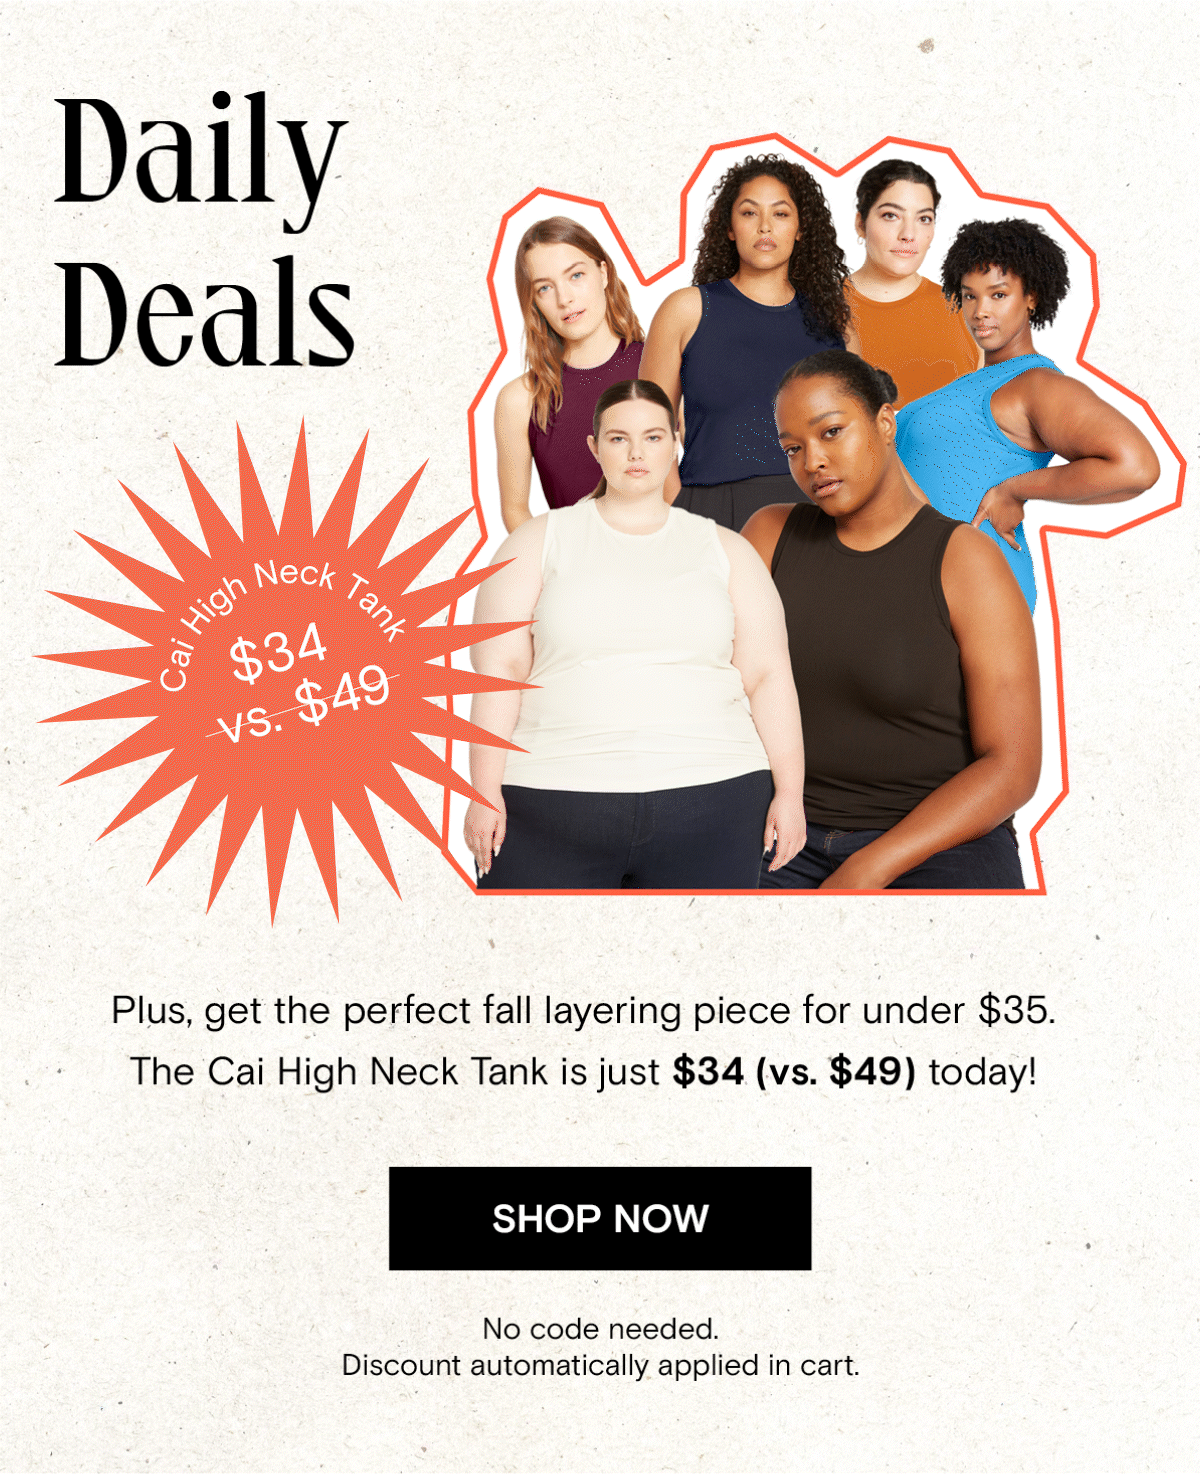 Today's deal of the day is the cai high neck tank for $34